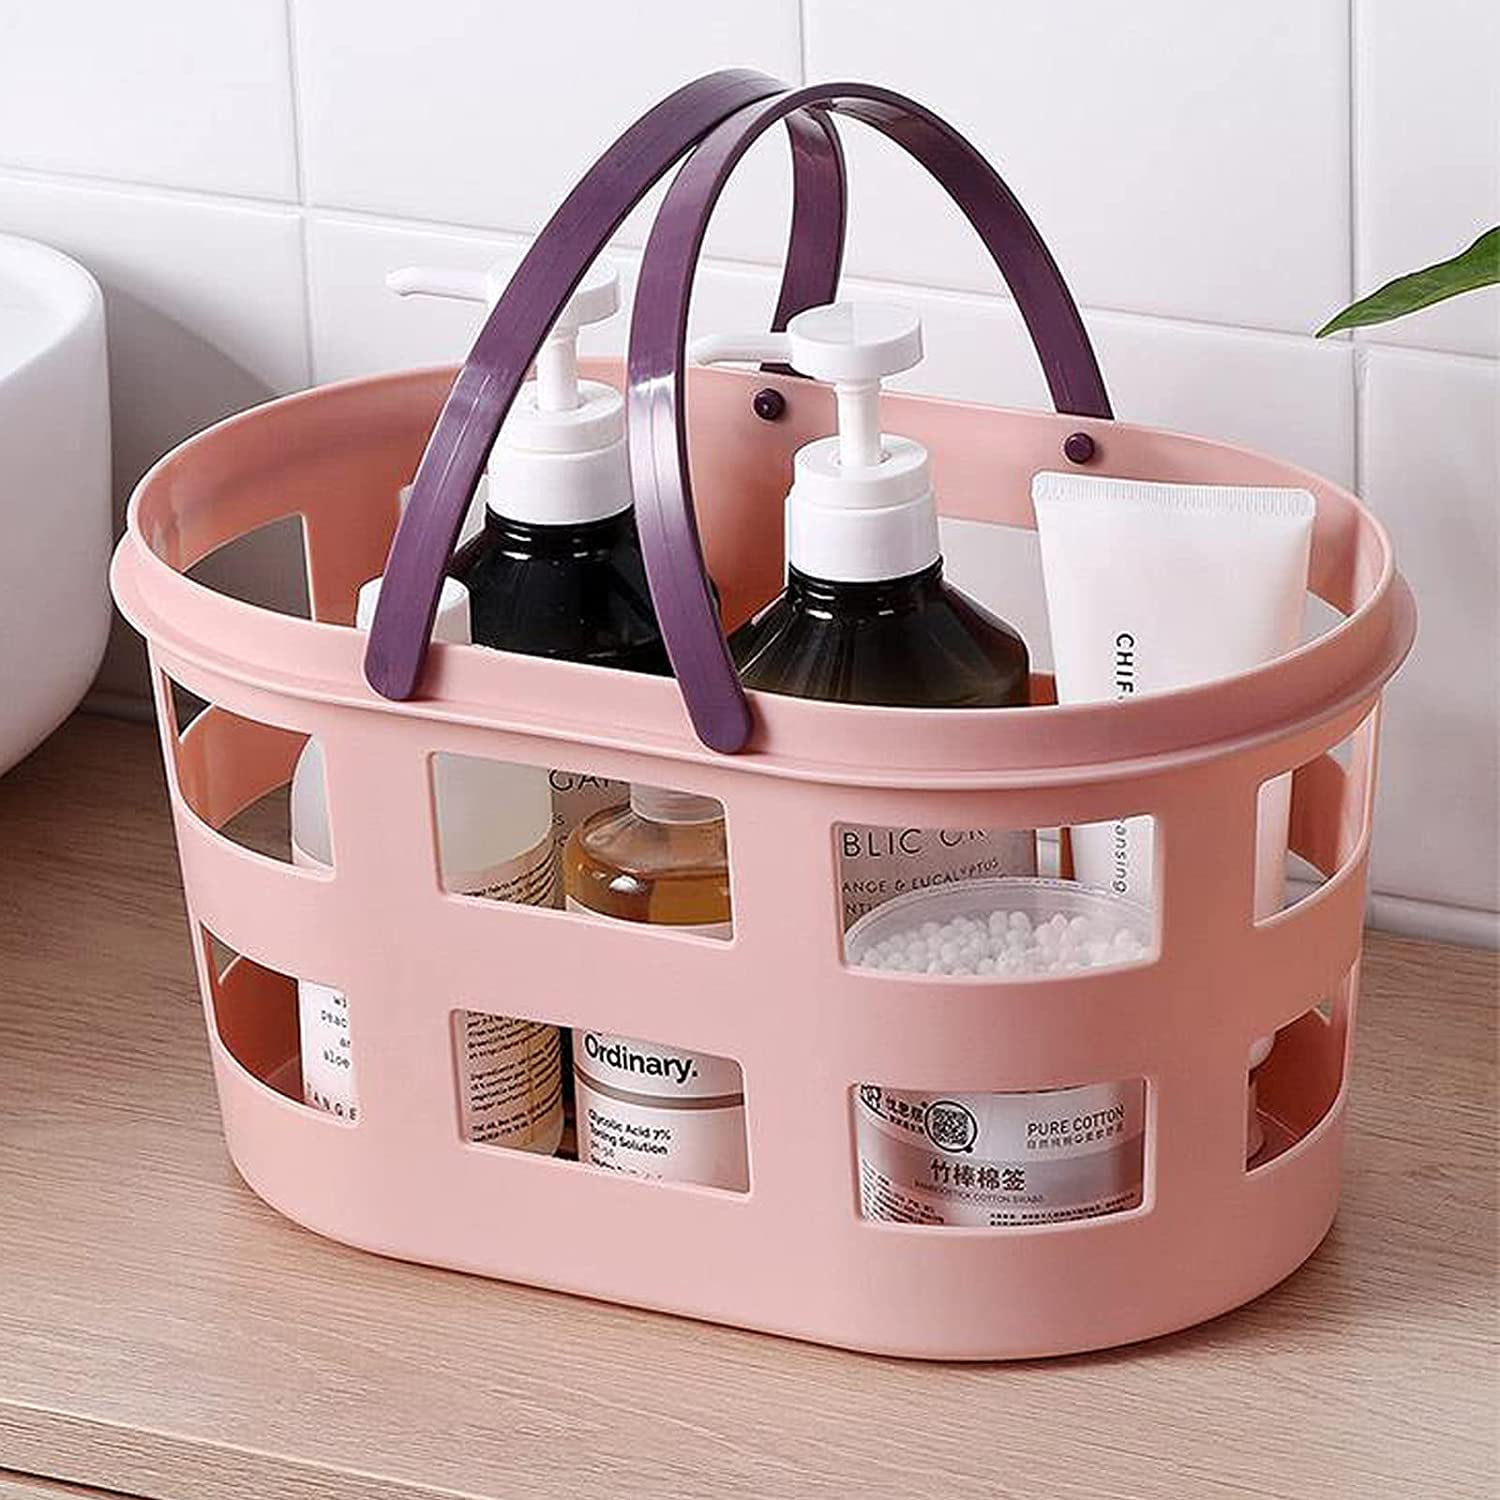 BABYLION1 Rose Gold Bathroom Organizer Shelf [4-pack] – Adhesive Shower  Caddy Baskets with 4 movable Hooks – Rustproof Stainless Steel Storage Rack